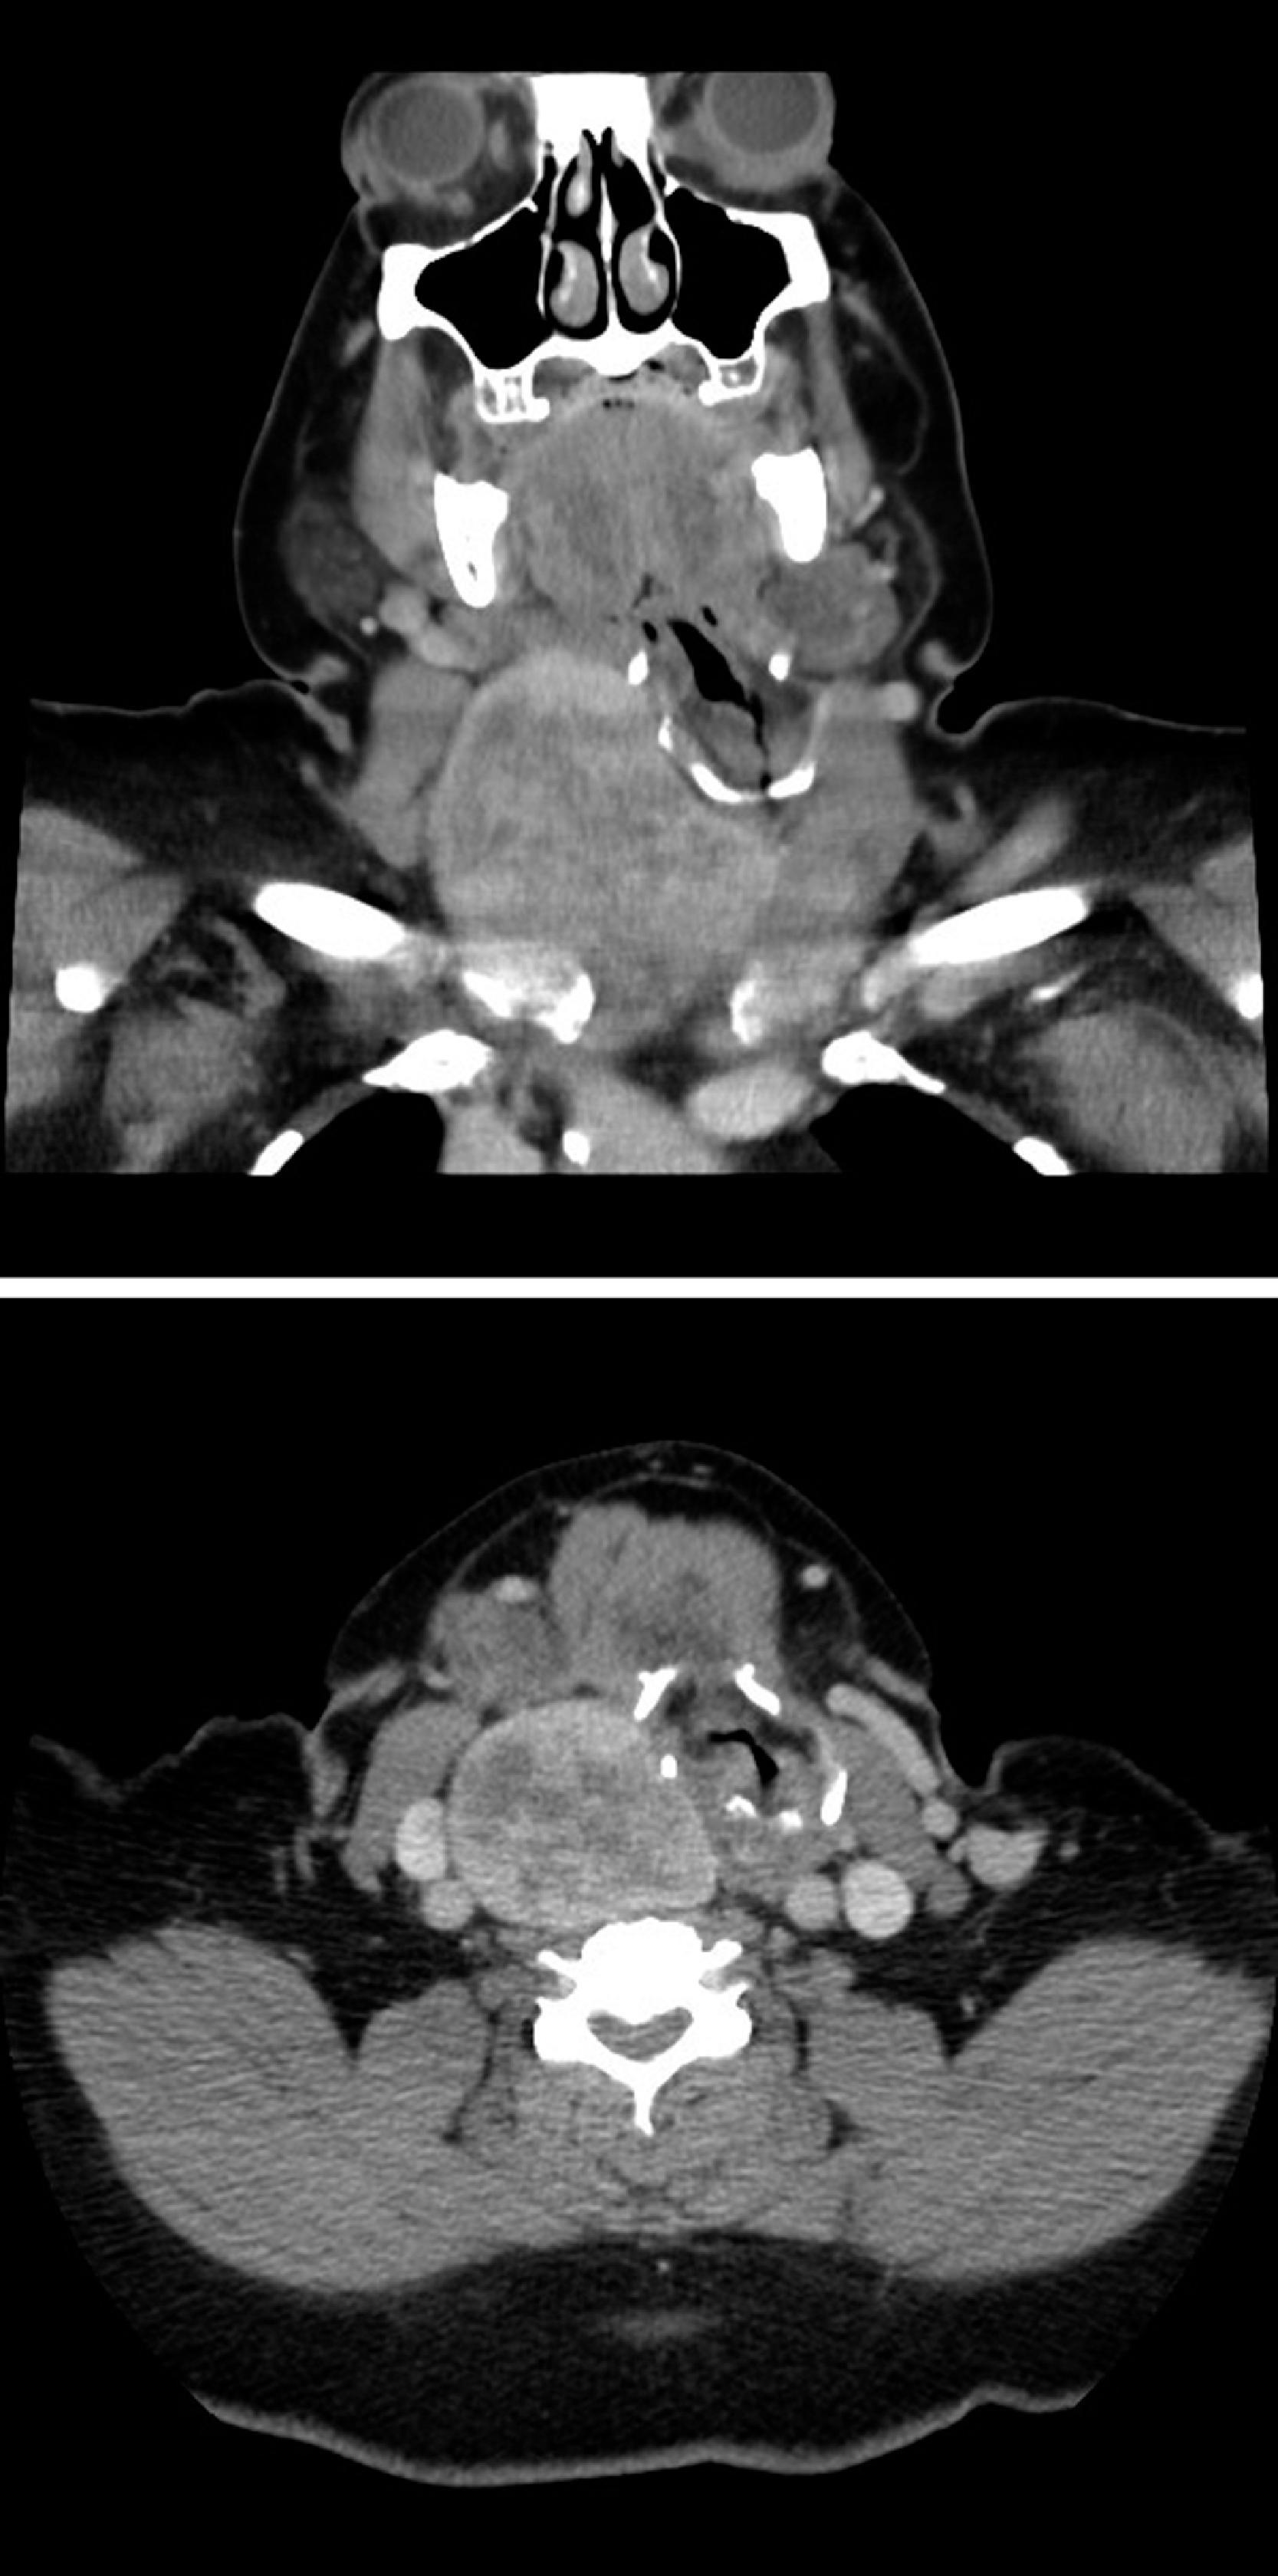 Fig. 17.1, Coronal (upper) and transverse (lower) planes of computed tomography (CT) images from a large thyroid mass. The CT images show significant left shift and compression of the larynx and trachea by the thyroid mass effect. However, the clinical evaluation indicated an asymptomatic patient with respect to respiratory status. The subsequent flexible scope intubation revealed insignificant airway compression suggesting a mismatch between CT findings and clinical presentation.